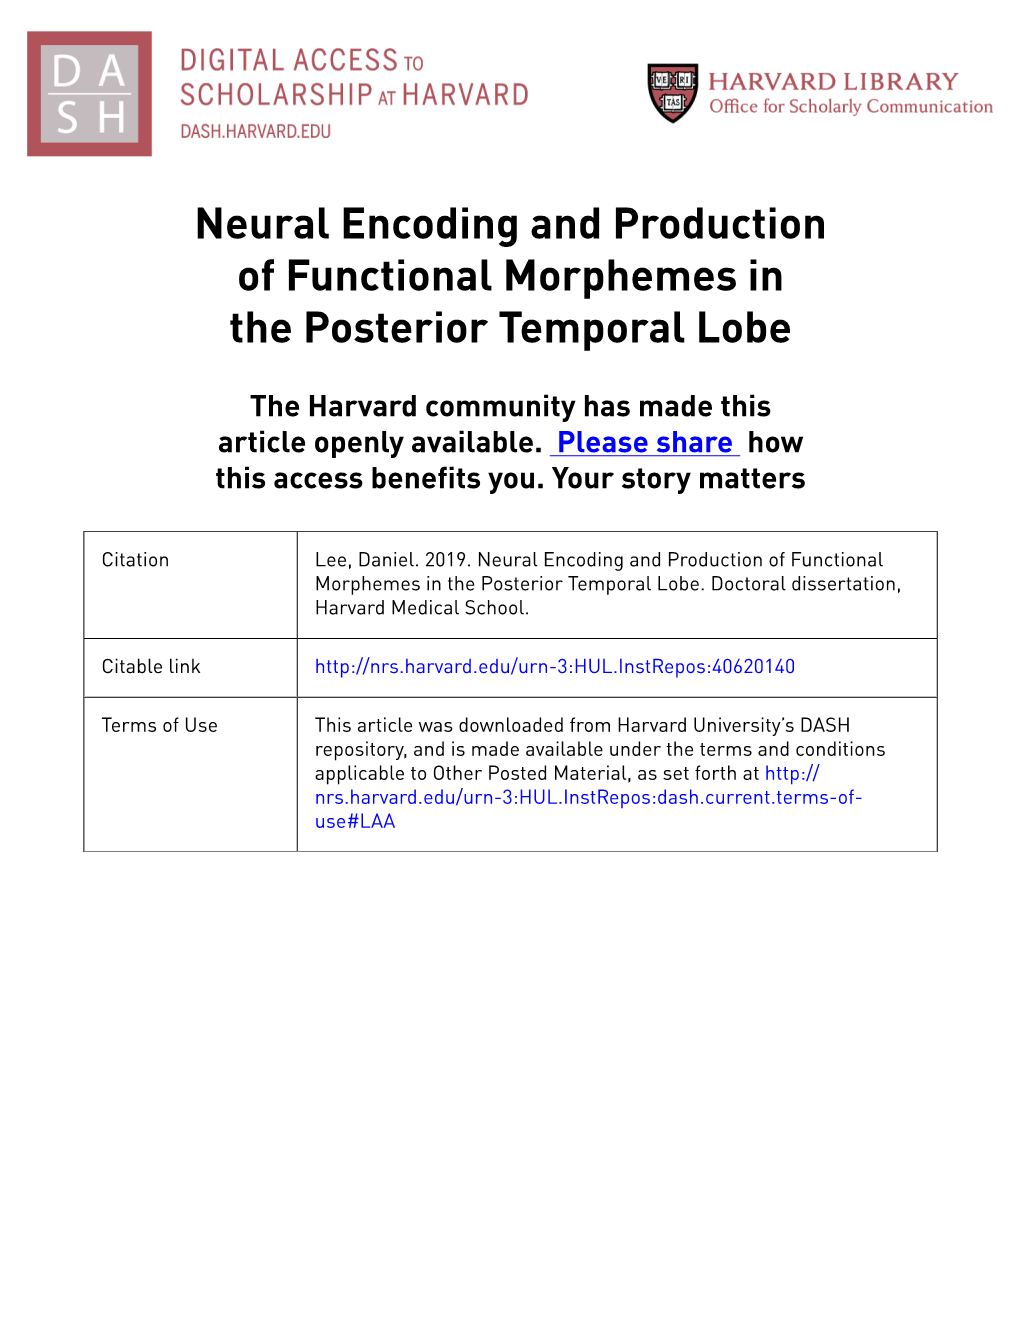 Neural Encoding and Production of Functional Morphemes in the Posterior Temporal Lobe